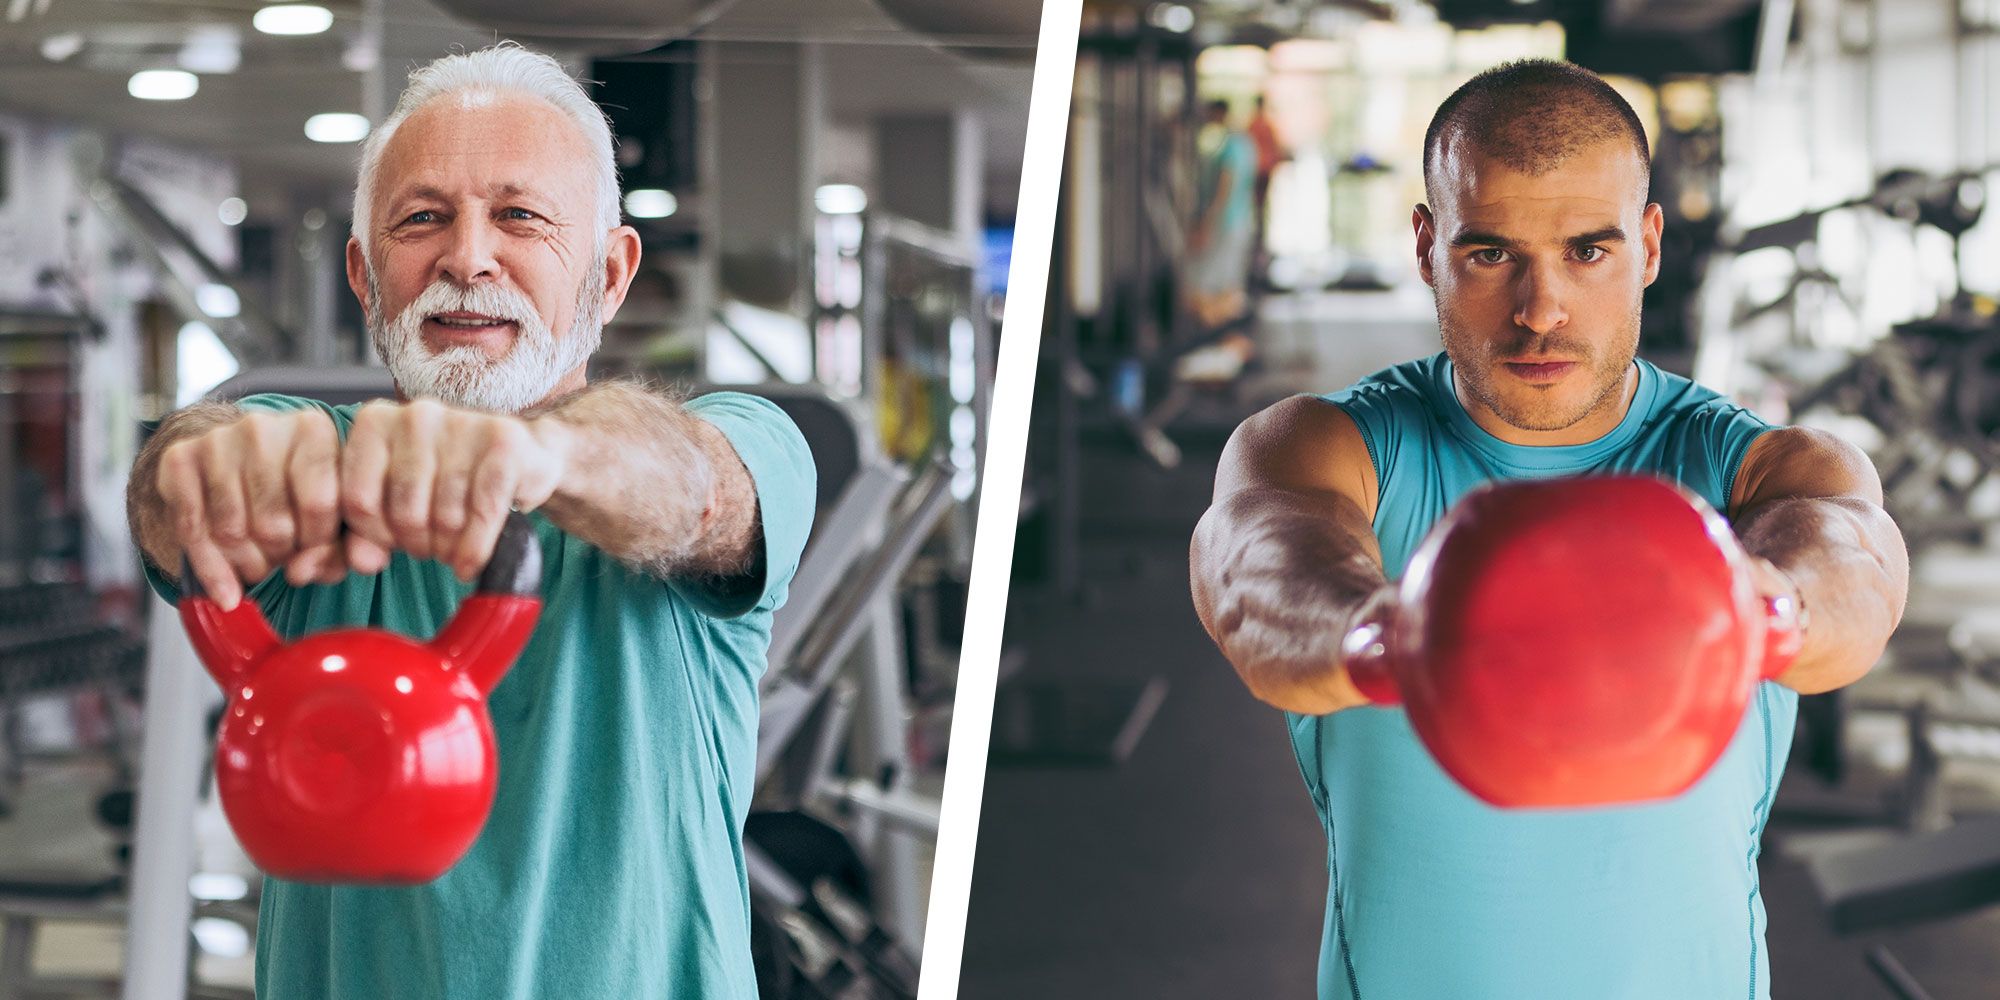 CrossFit Targeting Senior Citizens With 